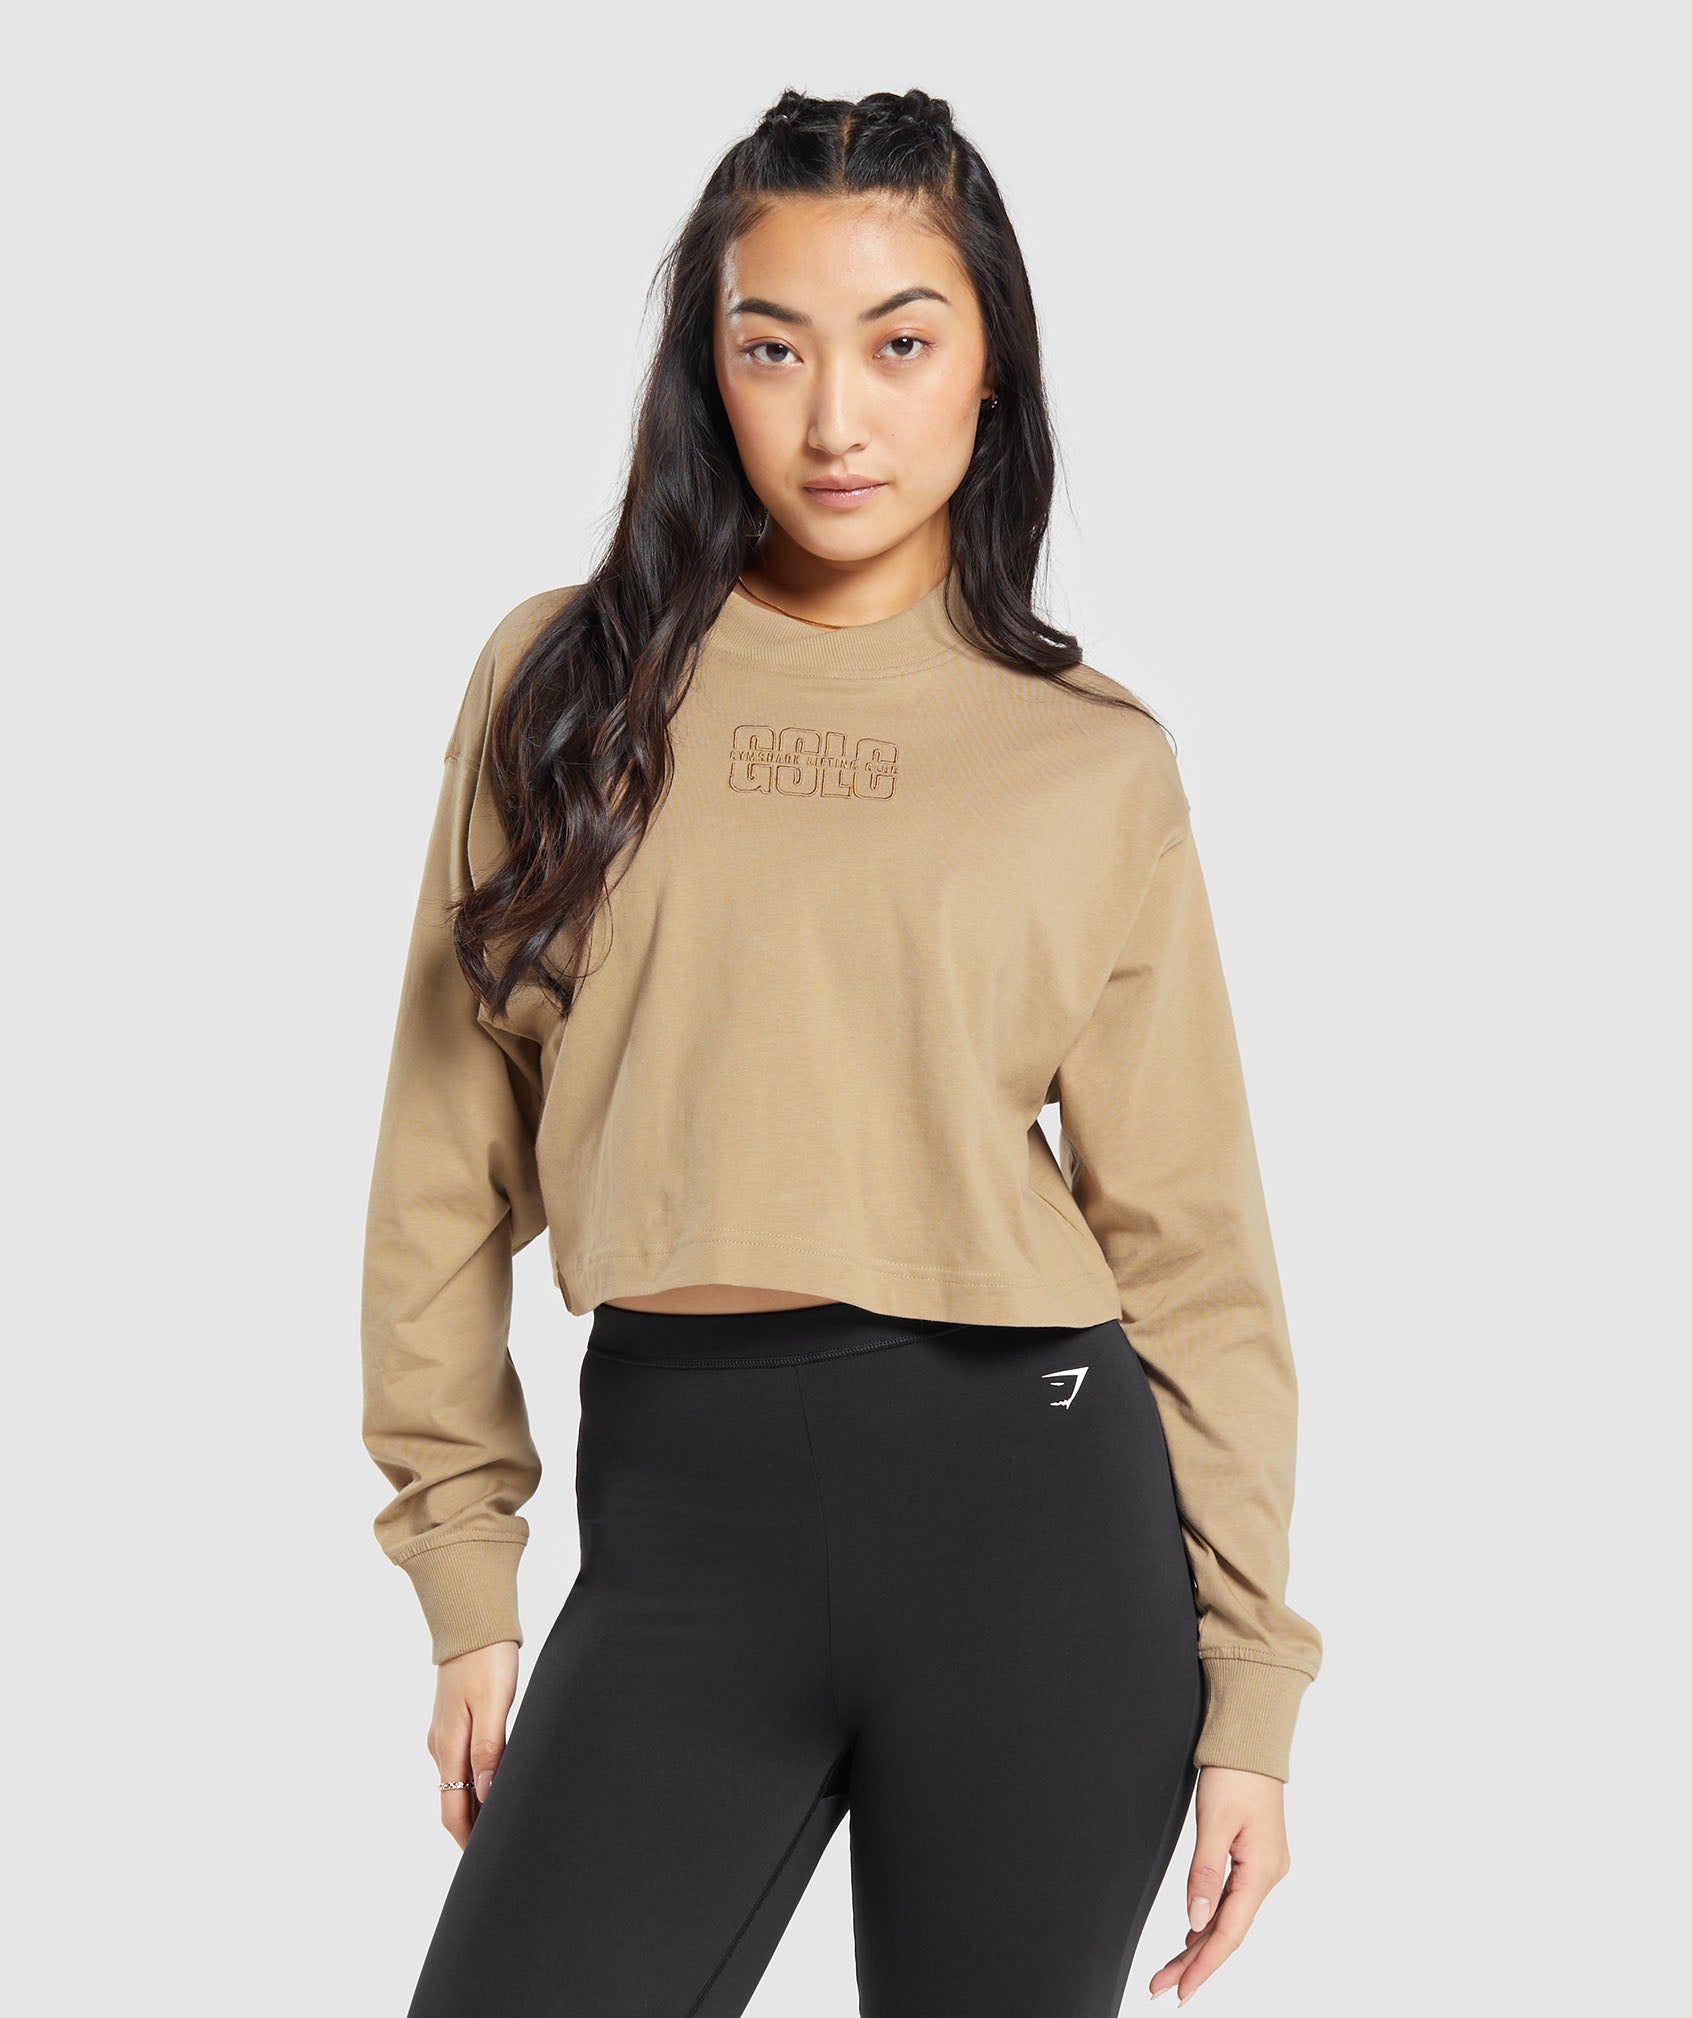 Outline Graphic Oversized Long Sleeve Top in Deep Fawn Brown